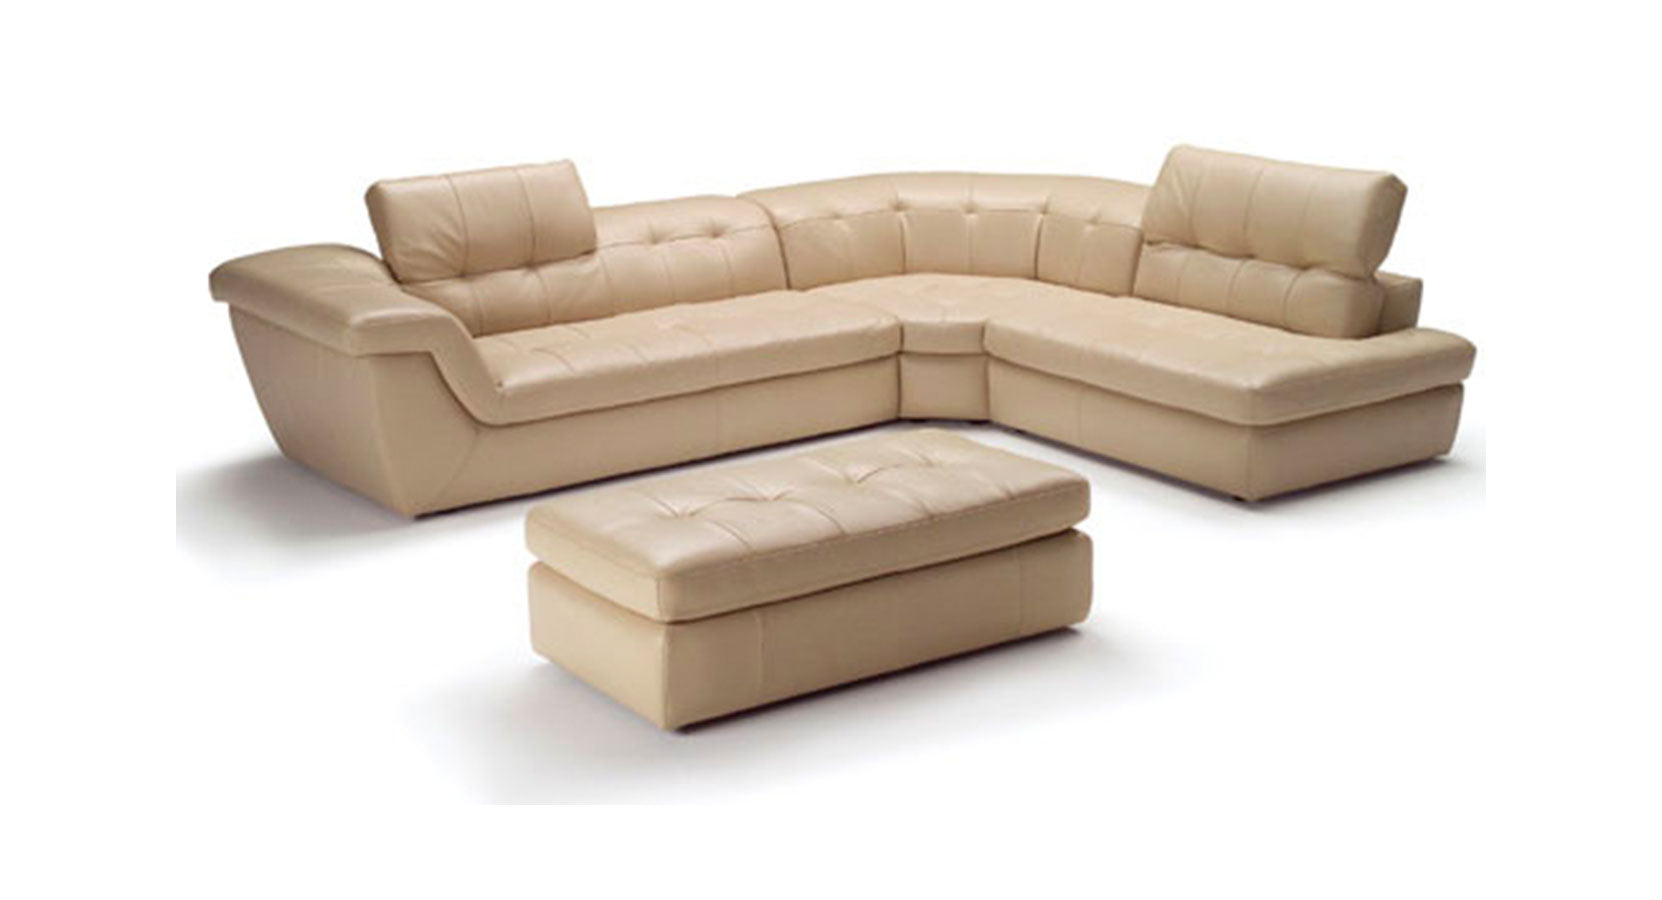 397 Premium Leather Sectional In Beige